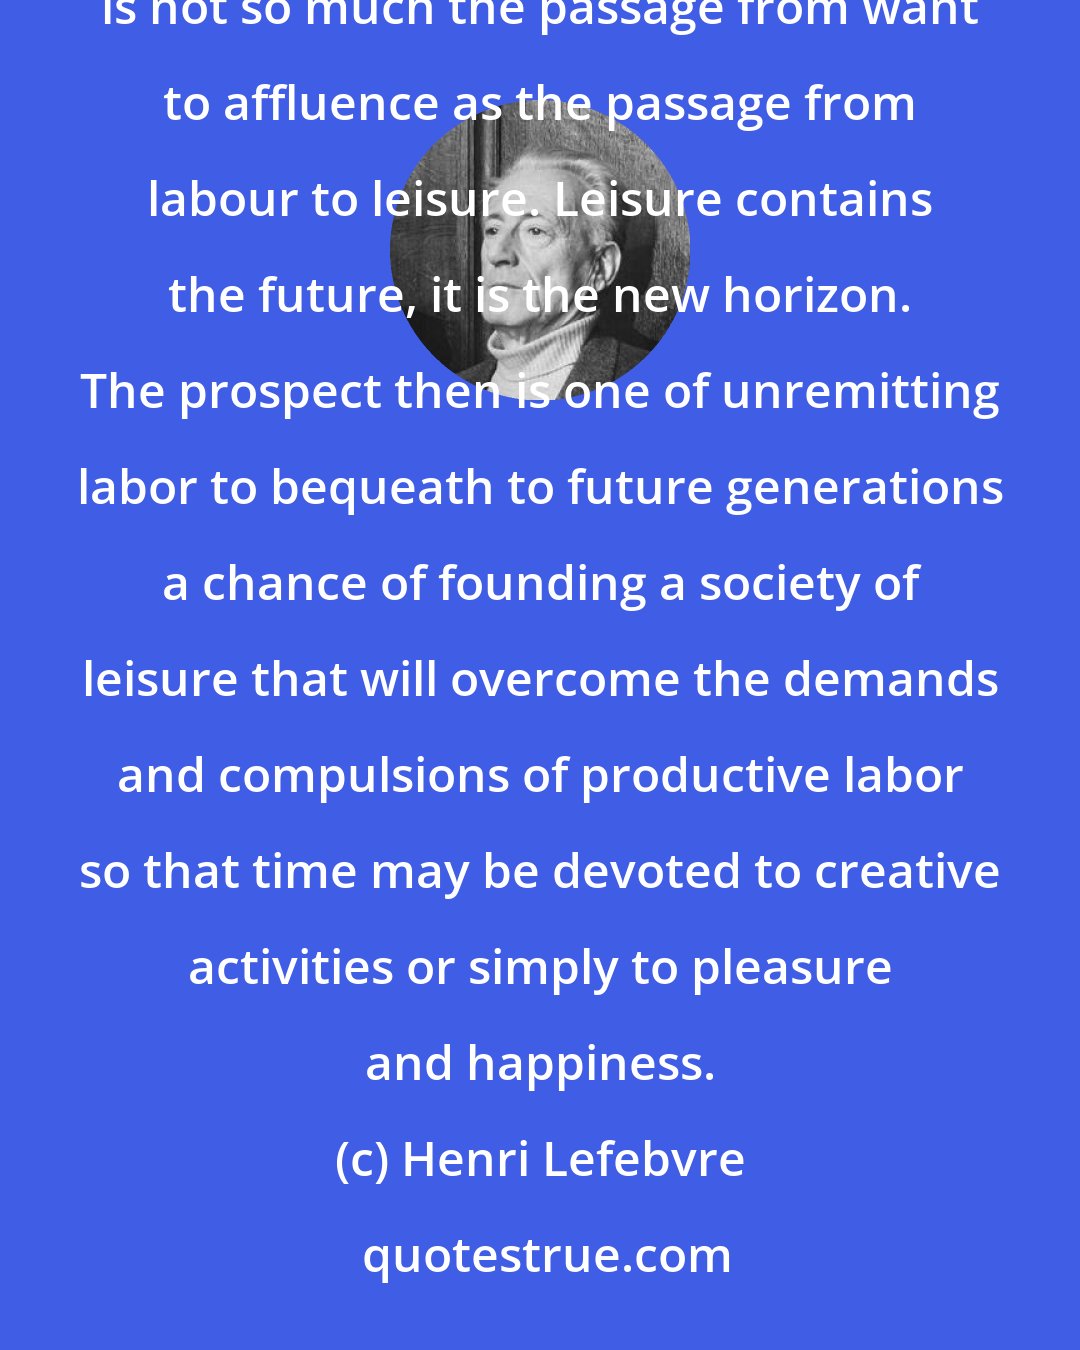 Henri Lefebvre: Society of leisure perhaps? Indeed, the most remarkable aspect of the transition we are living through is not so much the passage from want to affluence as the passage from labour to leisure. Leisure contains the future, it is the new horizon. The prospect then is one of unremitting labor to bequeath to future generations a chance of founding a society of leisure that will overcome the demands and compulsions of productive labor so that time may be devoted to creative activities or simply to pleasure and happiness.